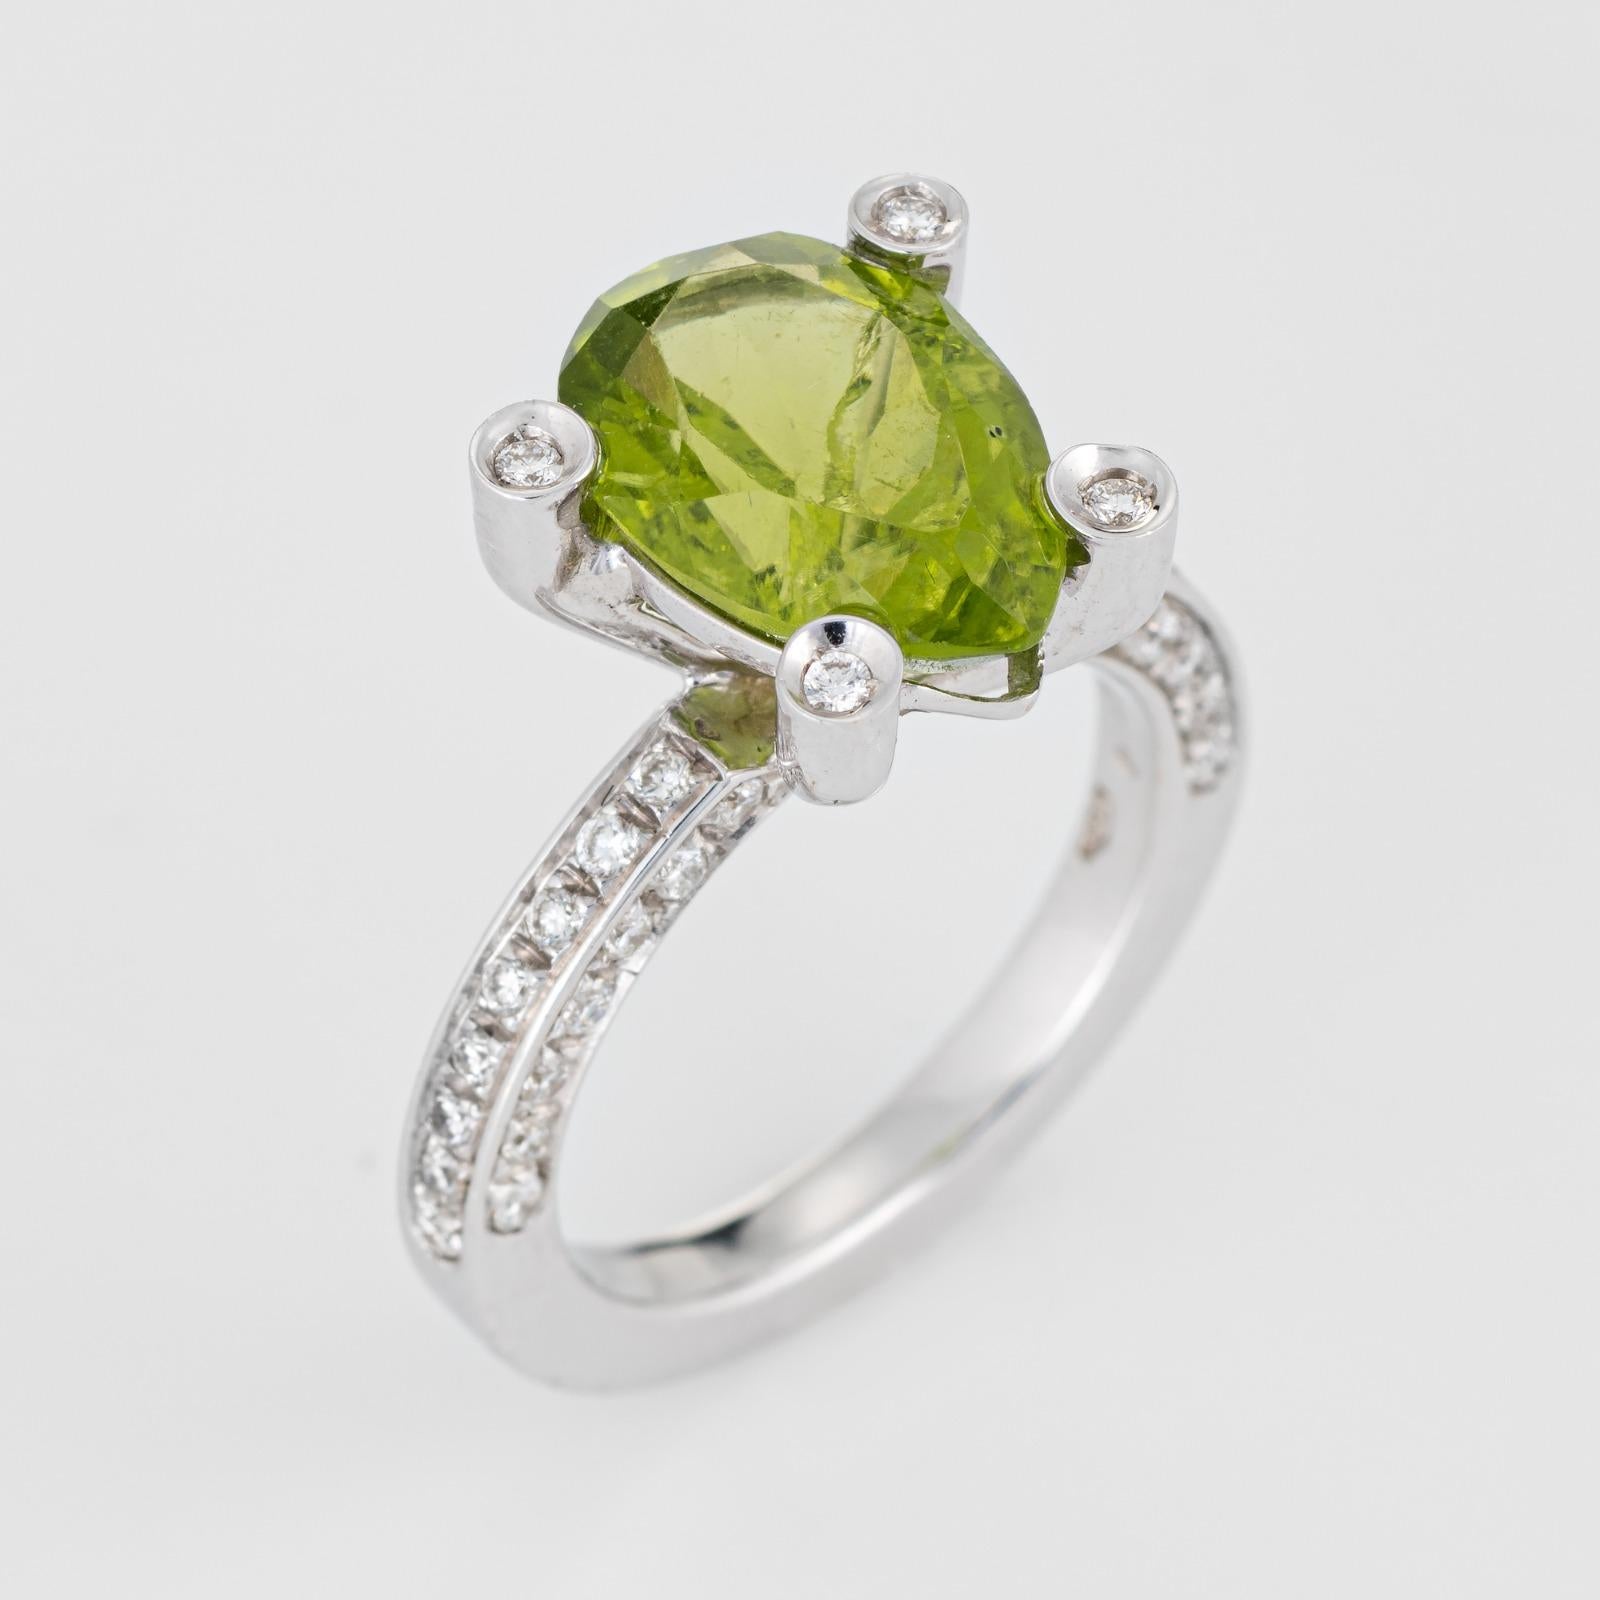 Stylish Antonini peridot & diamond cocktail ring, crafted in 18 karat white gold. 

Peridot is estimated at 3 carats, accented with an estimated 0.50 carats of diamonds (estimated at H-I color and VS2-SI1 clarity). The peridot is in very good